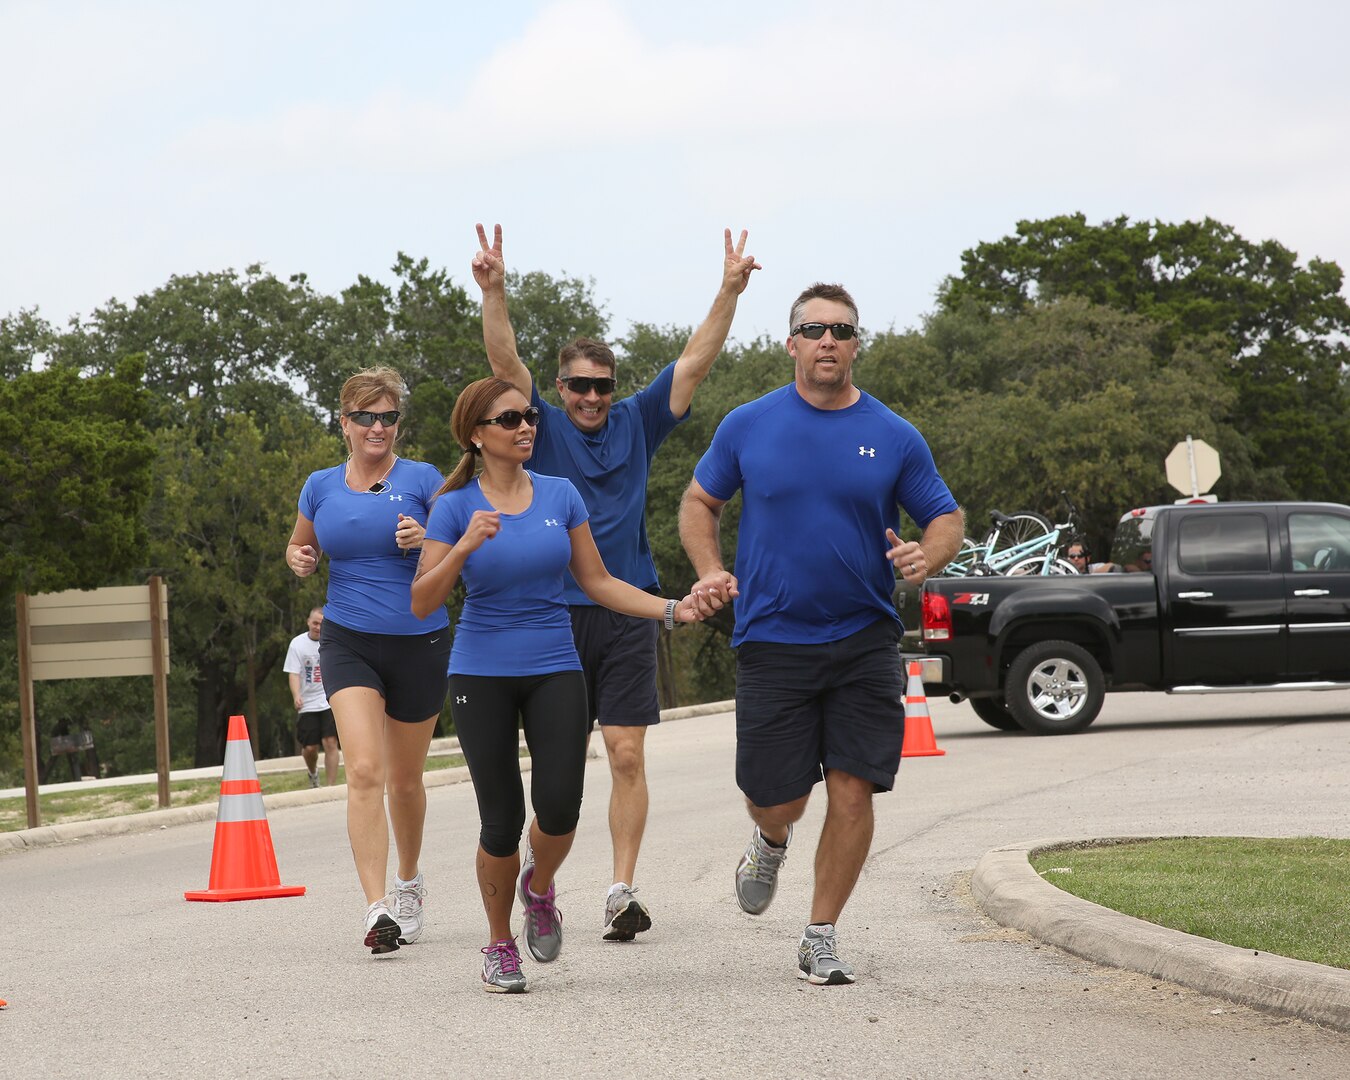 Team Phat Beer Cells crosses the finish line at the Rambler 120 triathlon event held at Joint Base San Antonio Recreation Park, Canyon Lake, Texas, Oct. 20.  Pictured from left are: Penelope Smith, Madelane How, Mike Misenhimer and Sean How.  At the conclusion of the event, Brig. Gen. Theresa Carter, Joint Base San Antonio and 502nd Air Base Wing commander, presented the Finishers Award to the team. (U.S. Air Force photo by Dan J. Solis) 